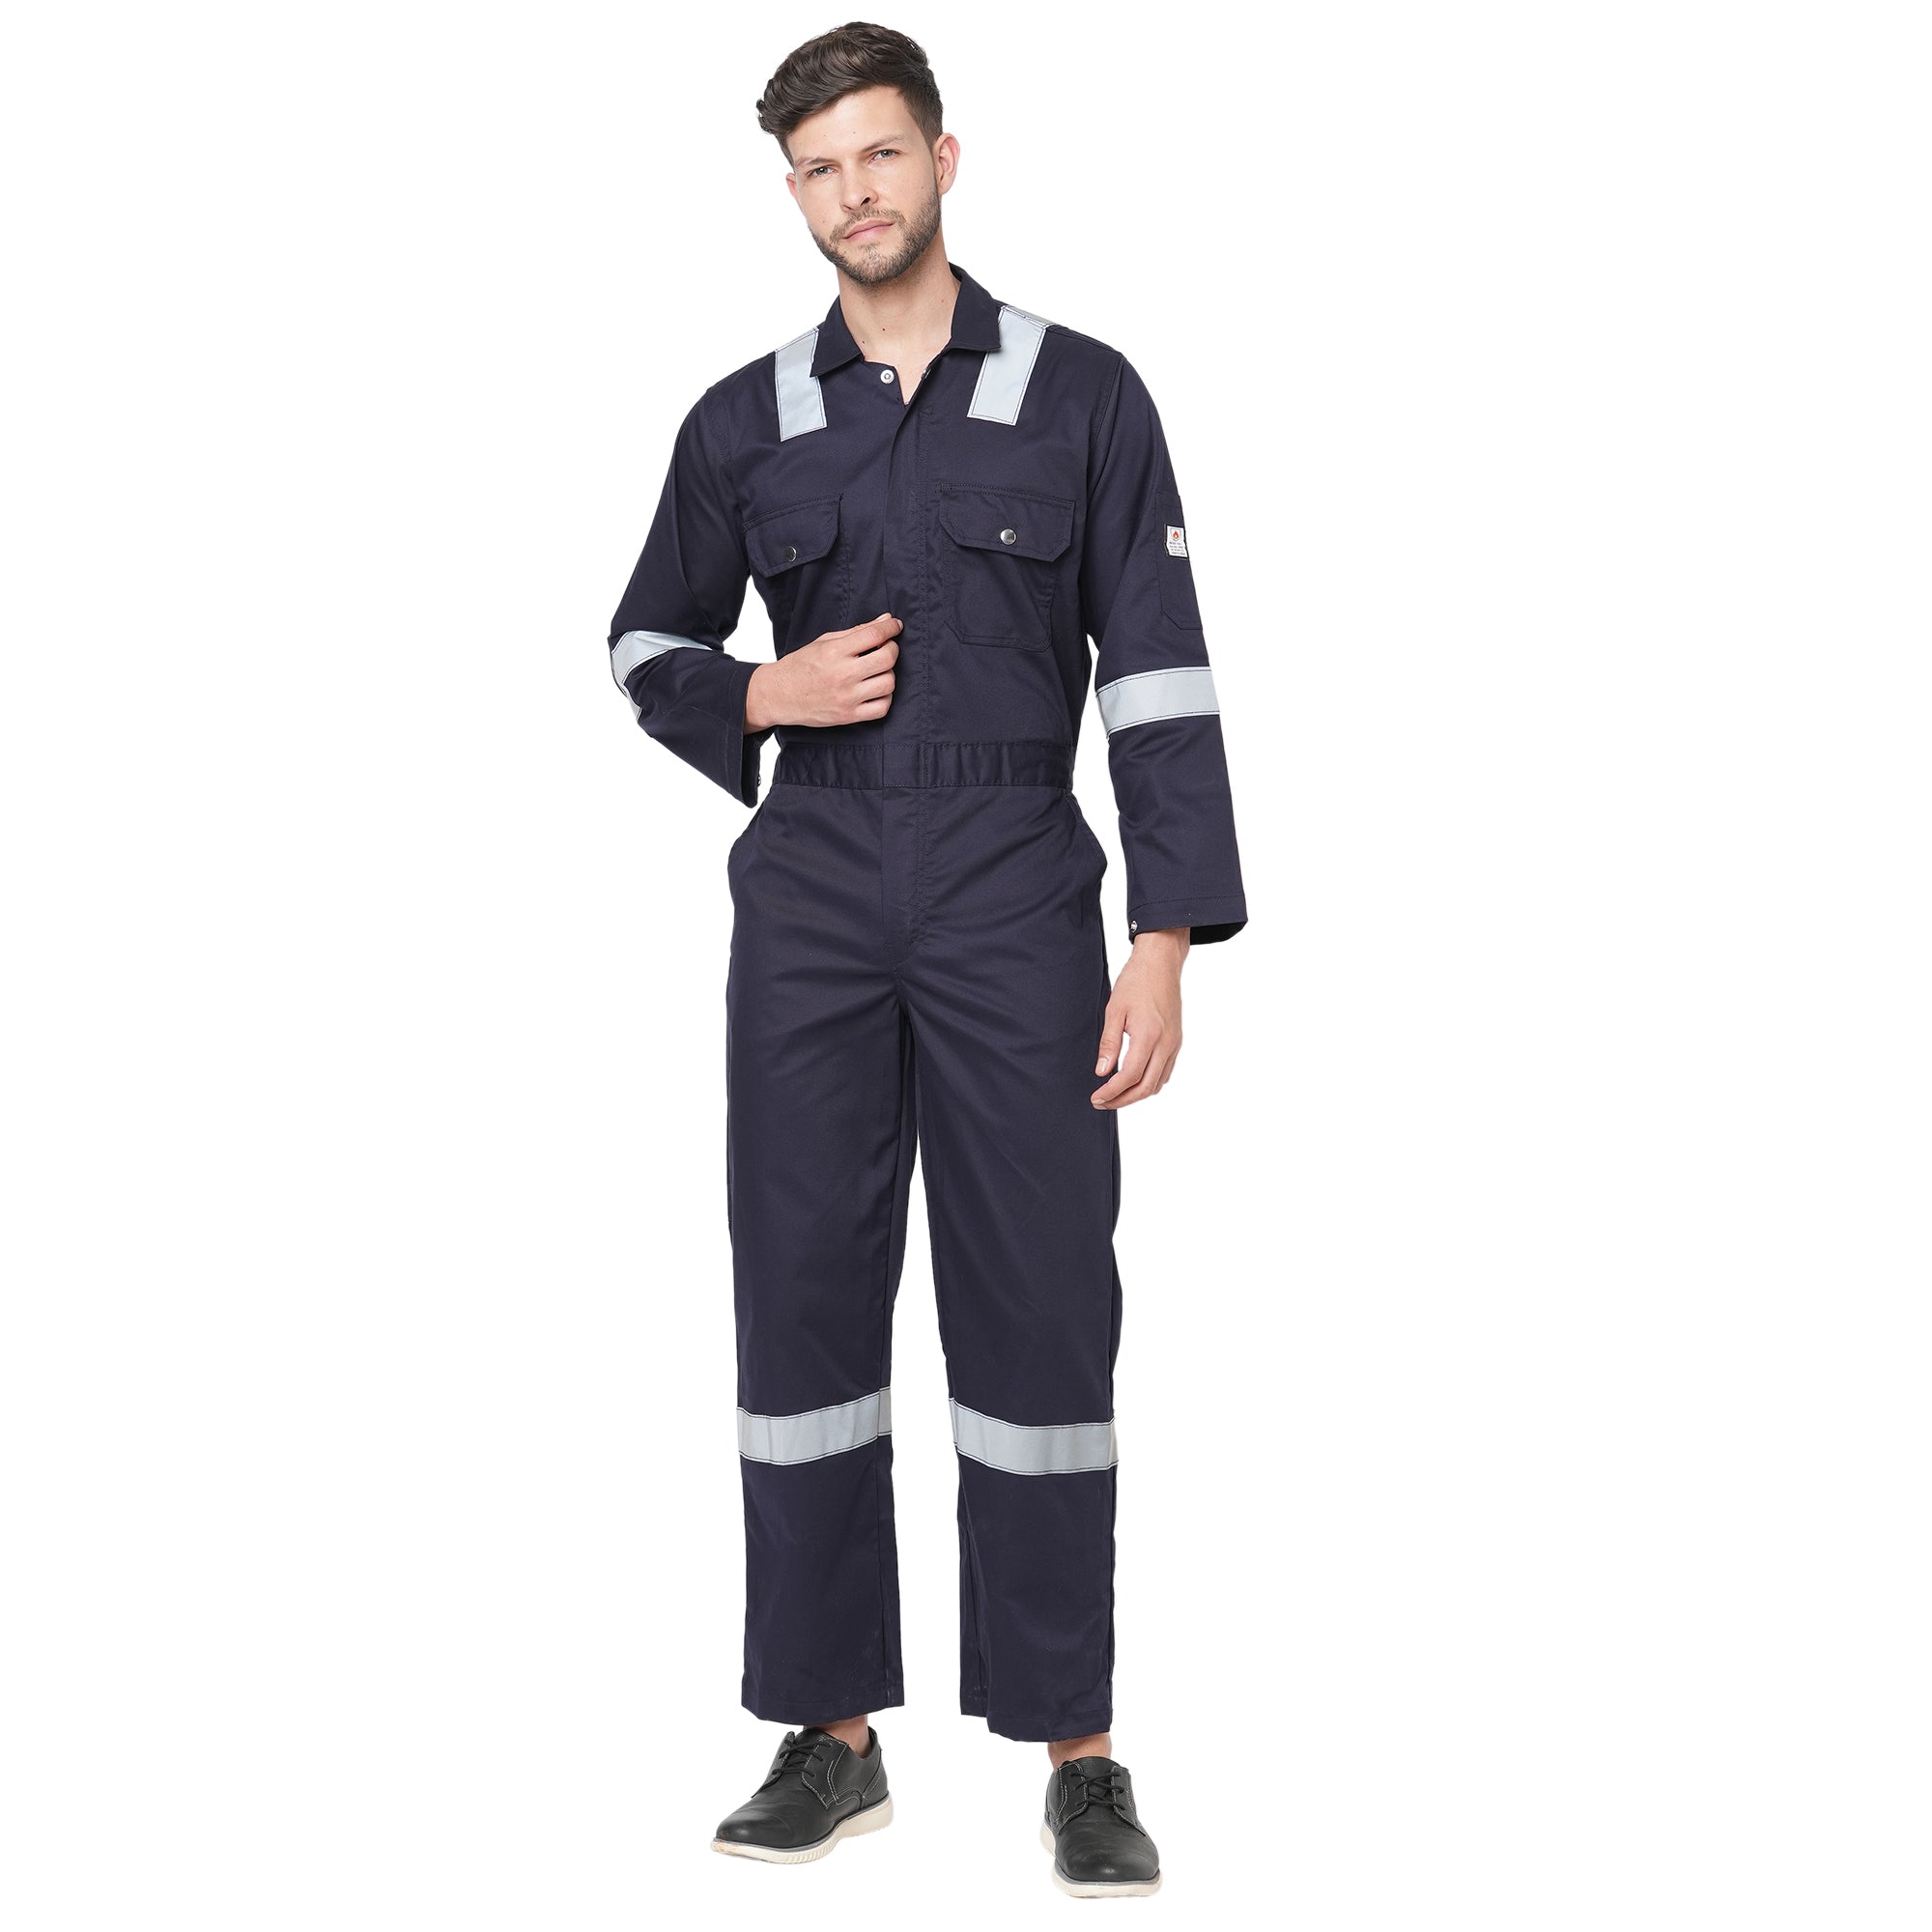 Buy Protective Coveralls, Disposable (WHITE) #C3852, West Chester Safety  Gear | PIP